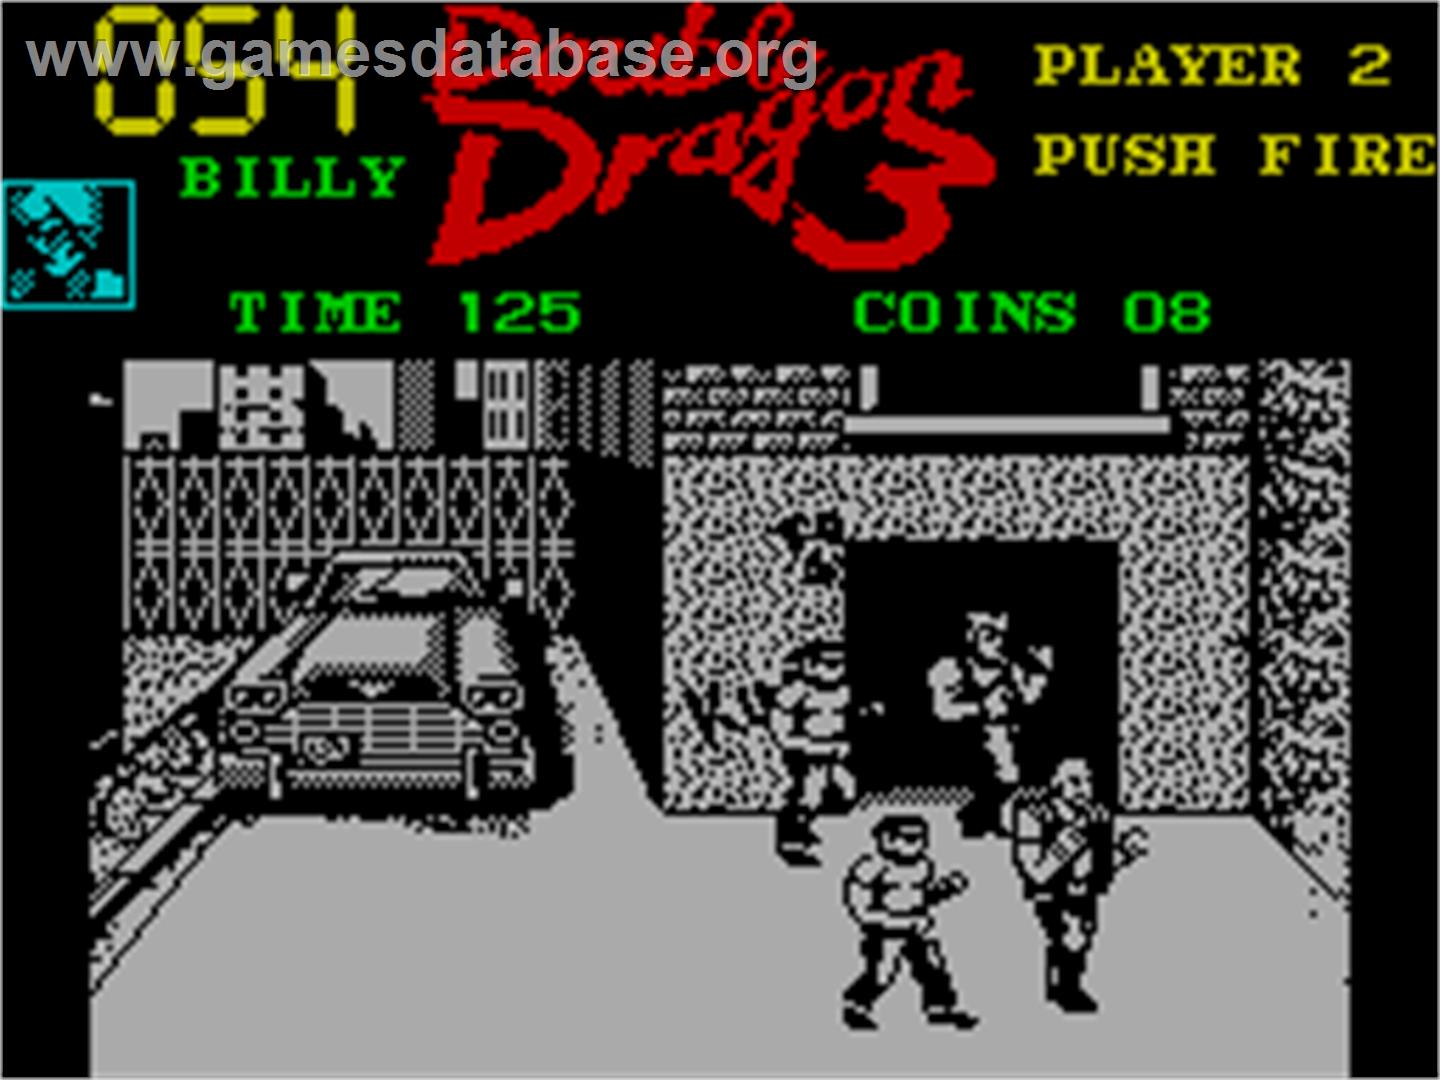 Double Dragon III: The Sacred Stones - Sinclair ZX Spectrum - Artwork - In Game